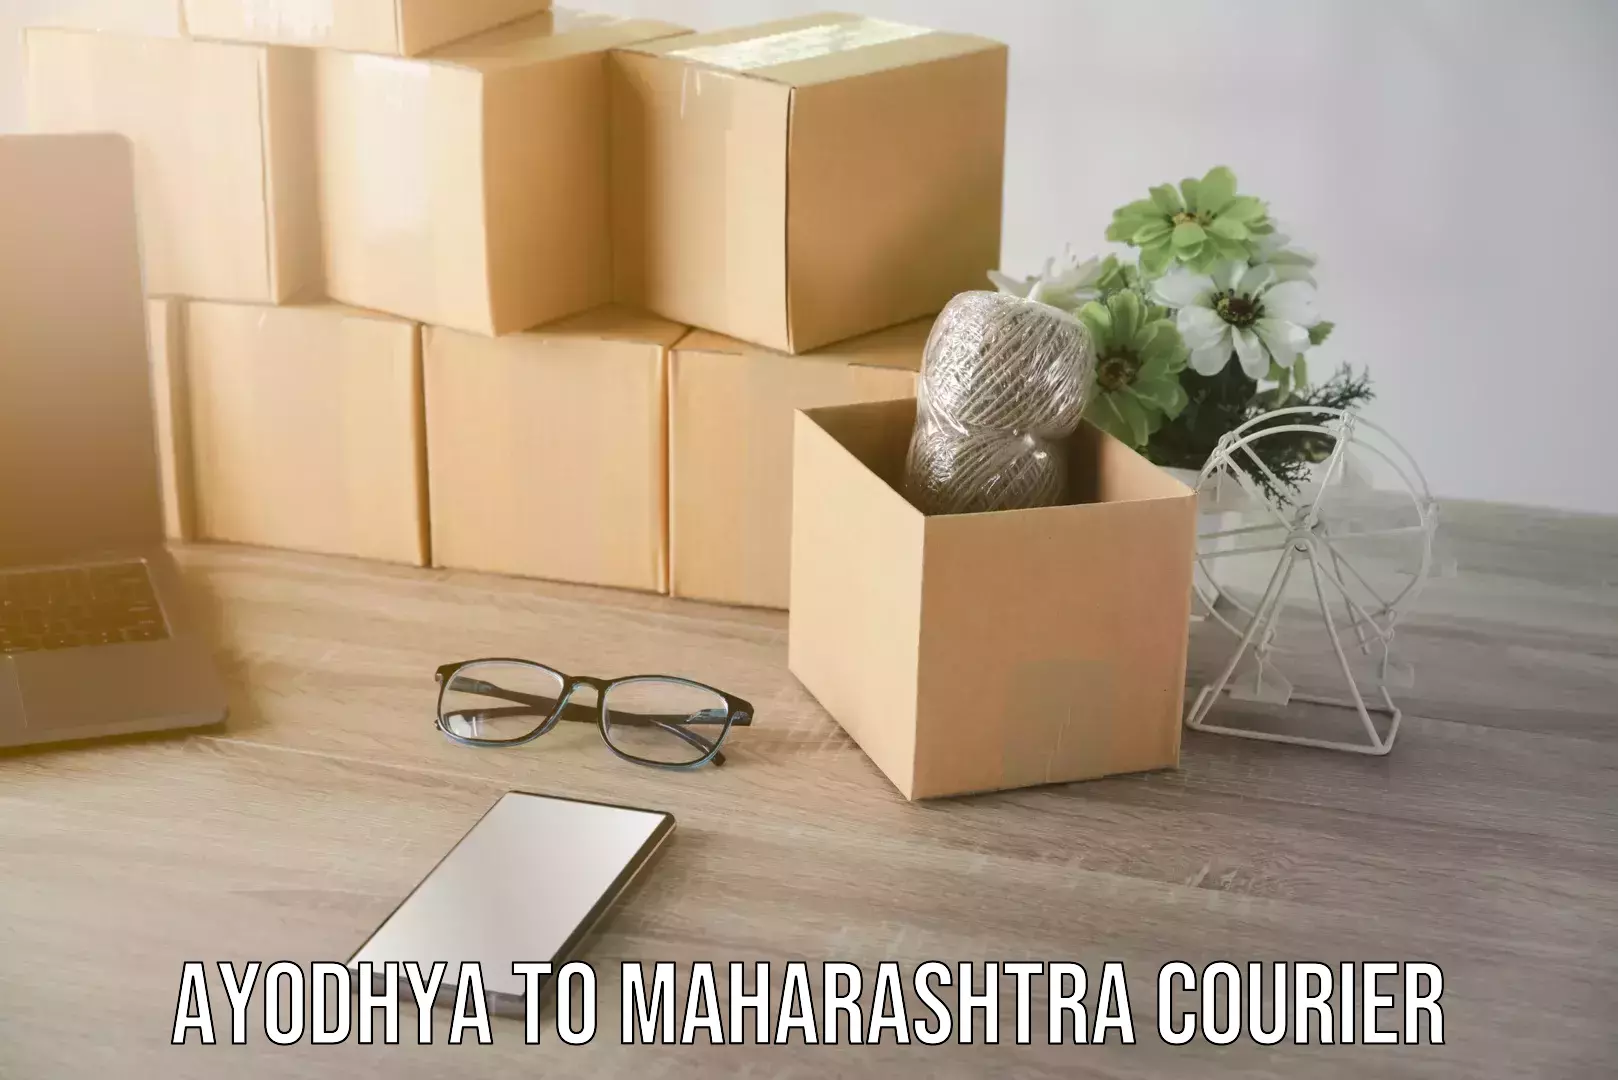 Reliable delivery network Ayodhya to Maharashtra